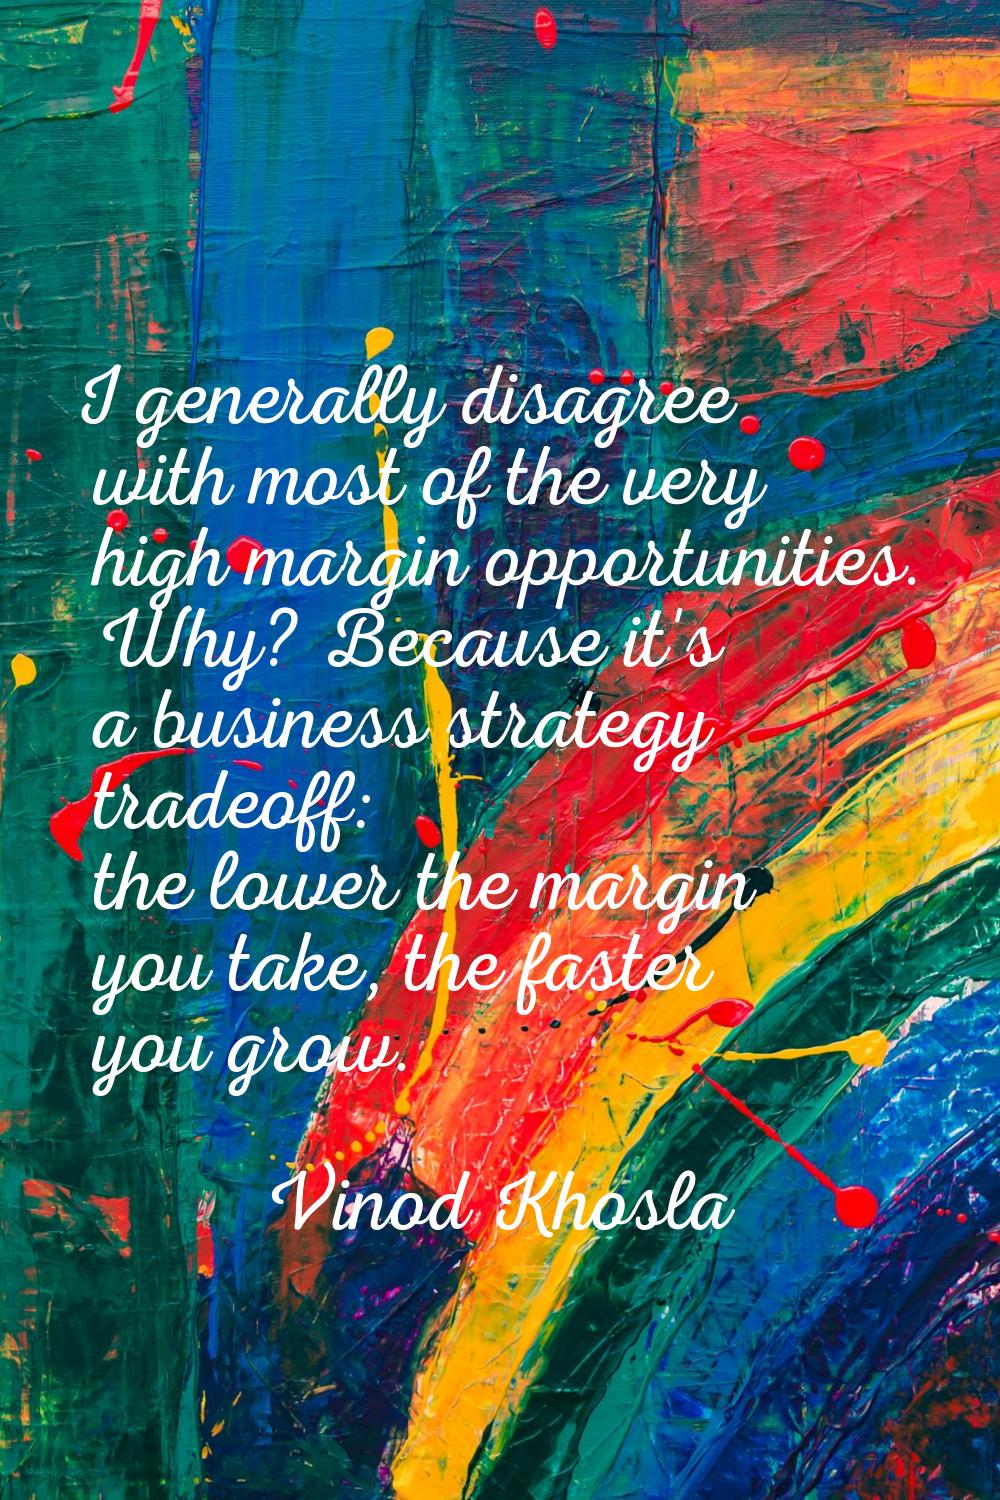 I generally disagree with most of the very high margin opportunities. Why? Because it's a business 